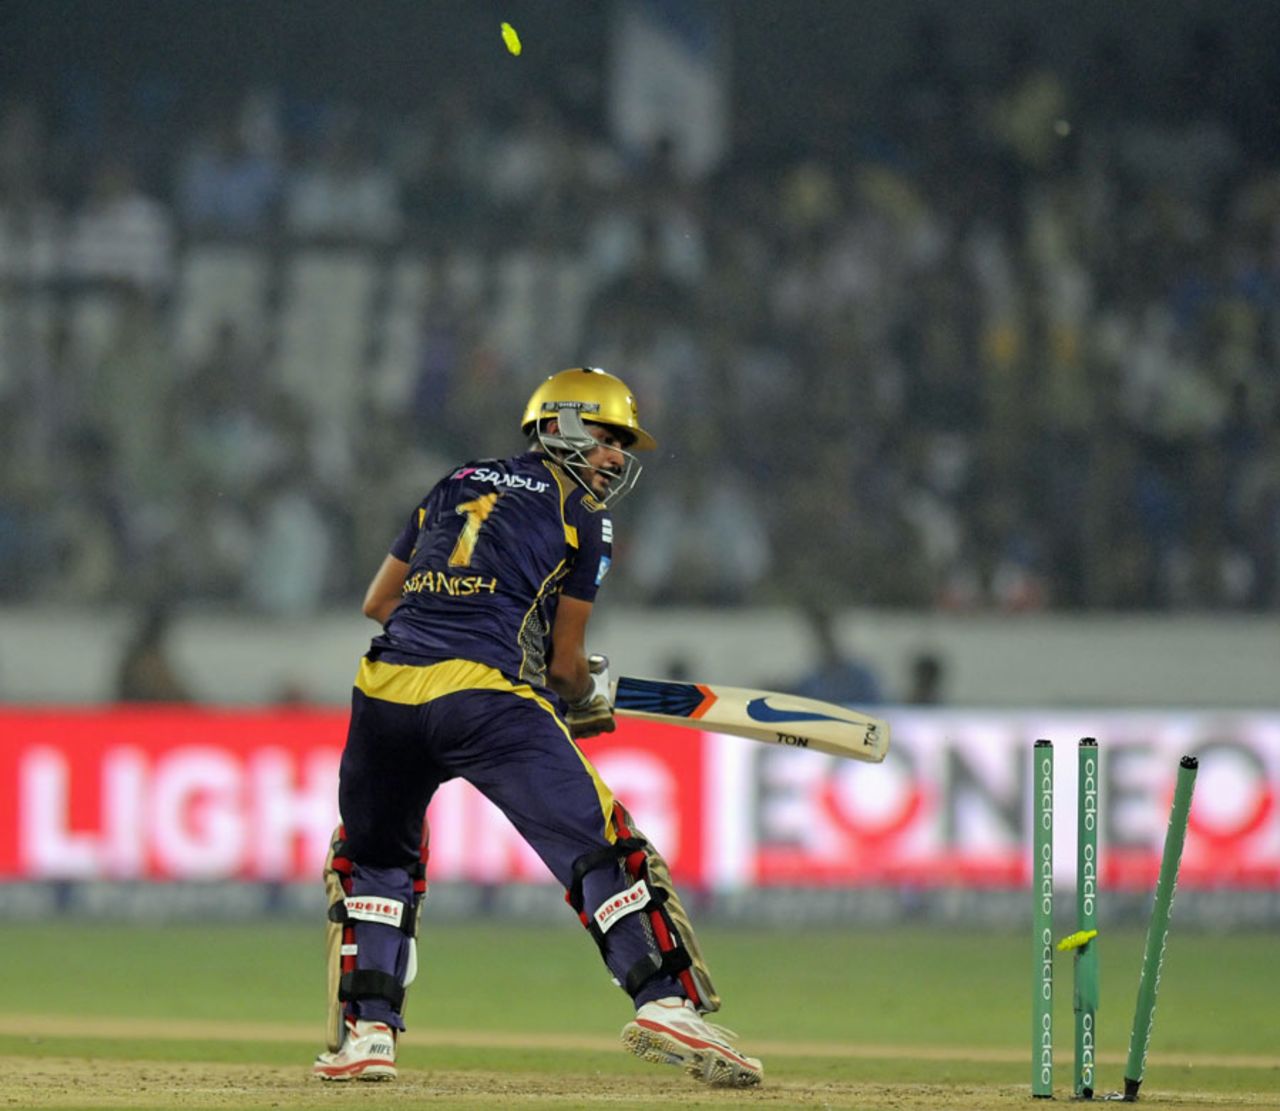 Manish Pandey was bowled by Nathan Coulter-Nile for 24, Kolkata Knight Riders v Perth Scorchers, CLT20, Group A, Hyderabad, September 24, 2014